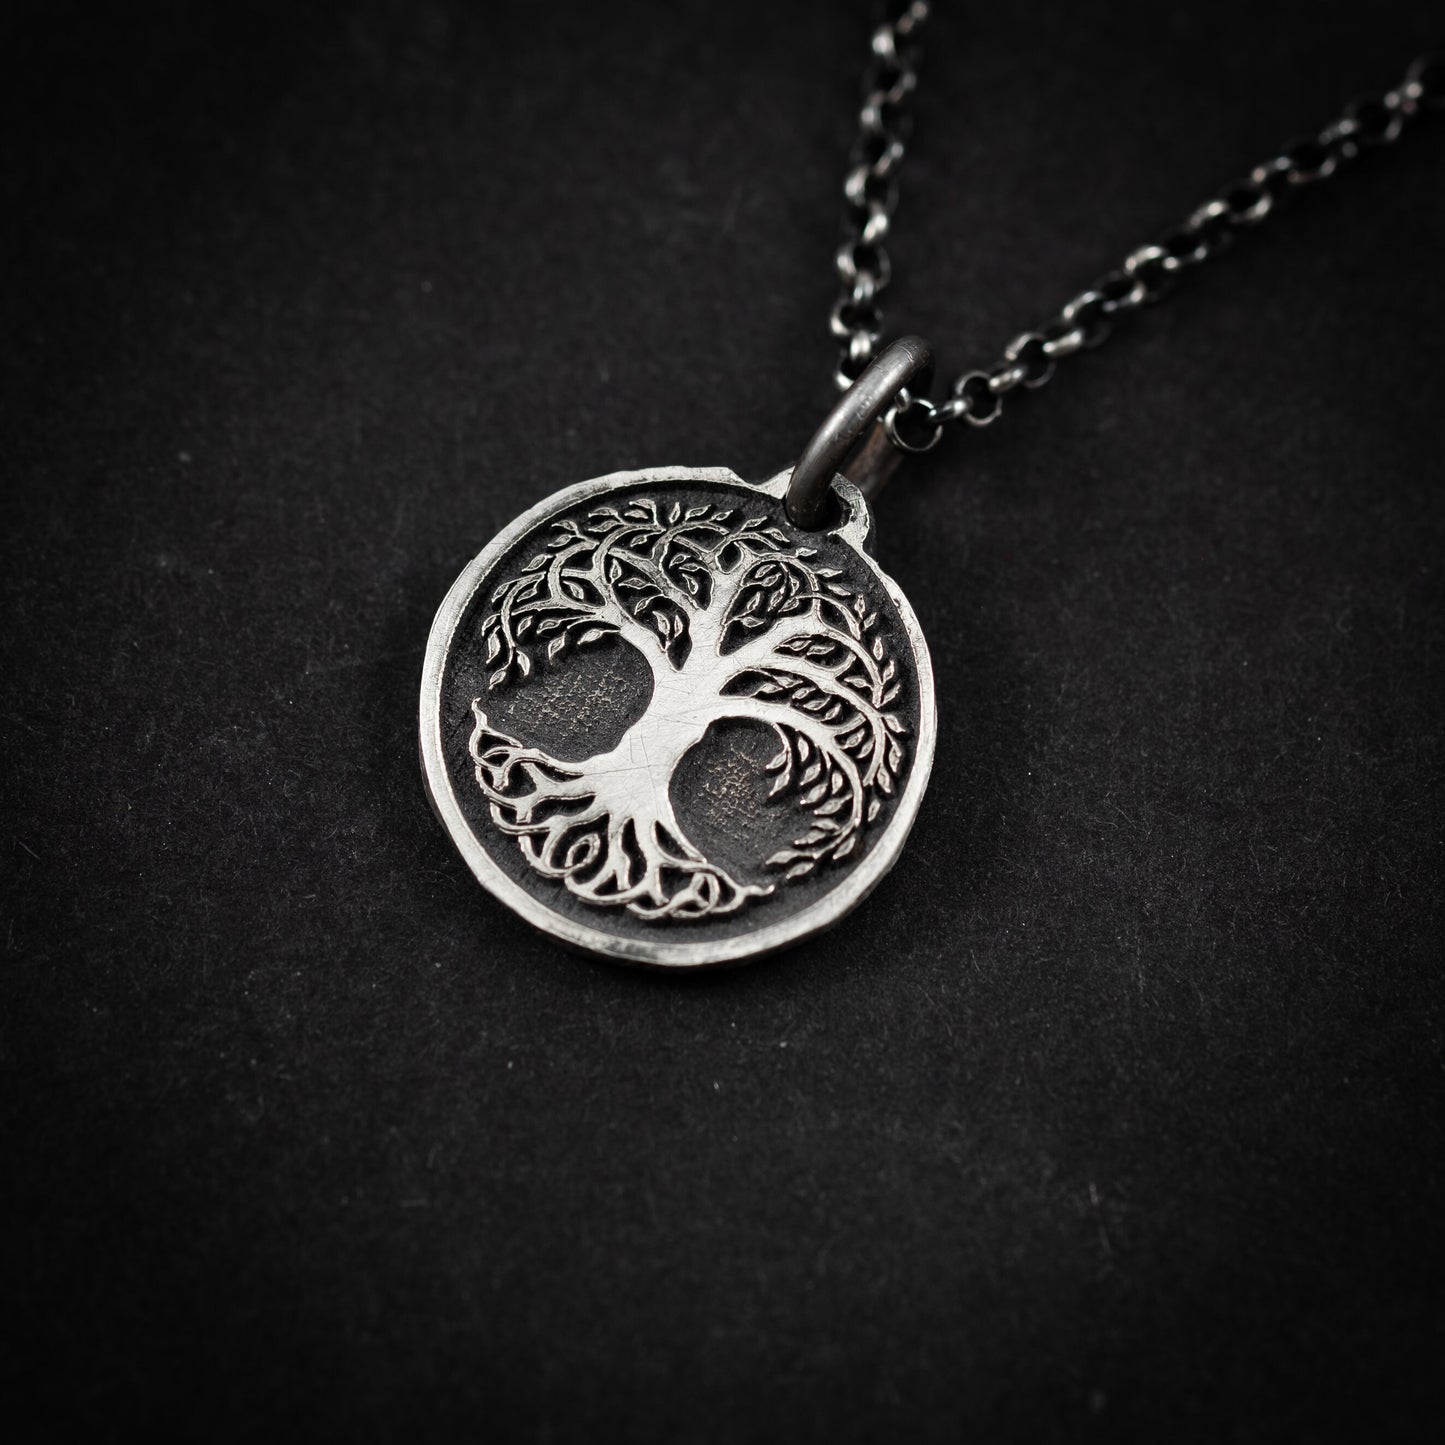 Yggdrasil Viking Tree of Life Silver necklace, Unique viking mens jewelry, Personalized rustic necklace, norse mythology jewelry, men gift